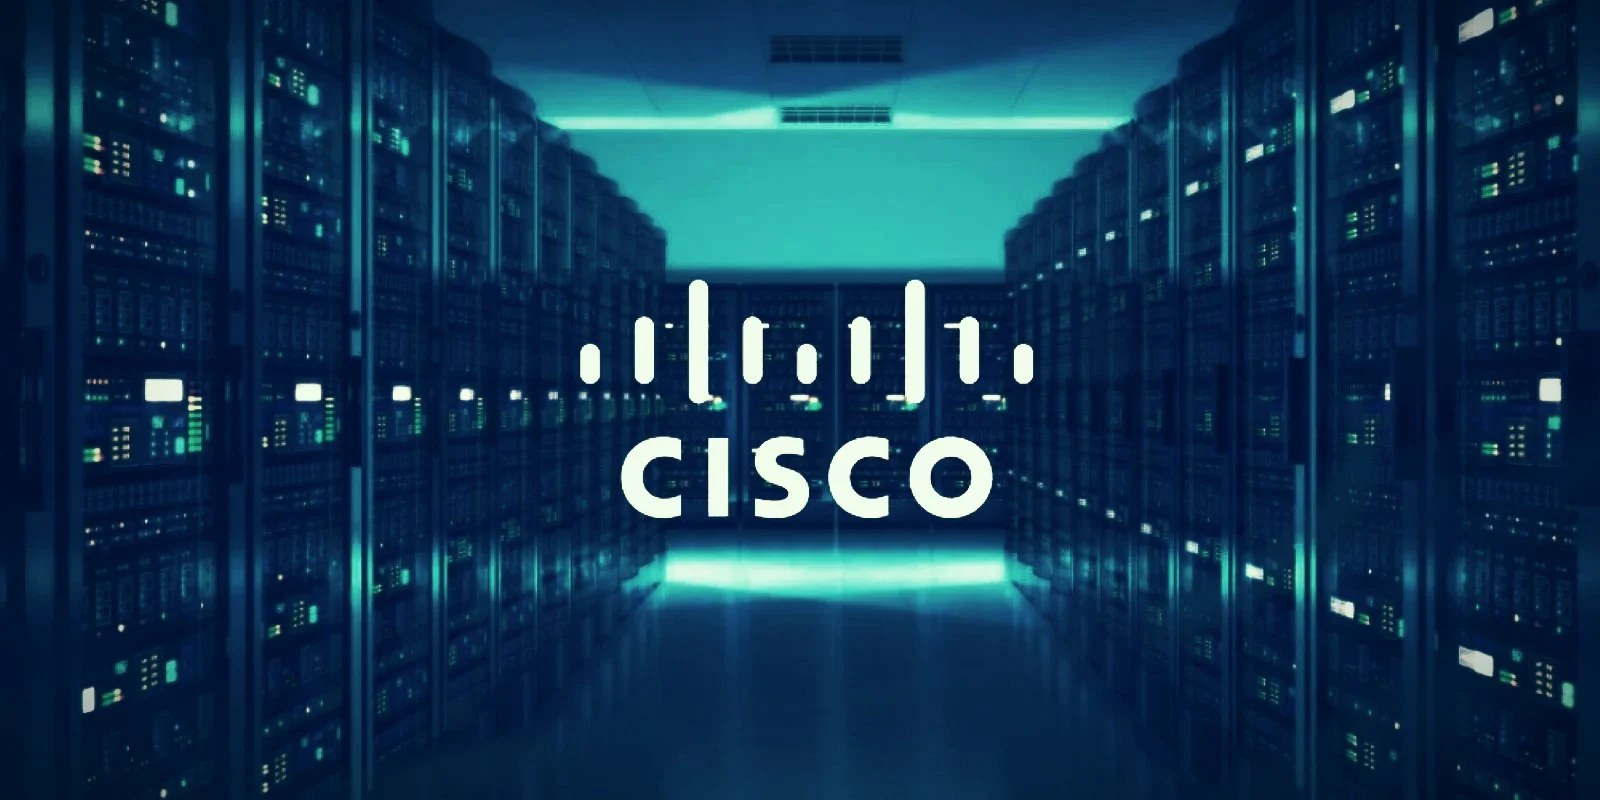 Cisco Announces $28B Acquisition Of Splunk, Expanding Its Security And Observability Capabilities